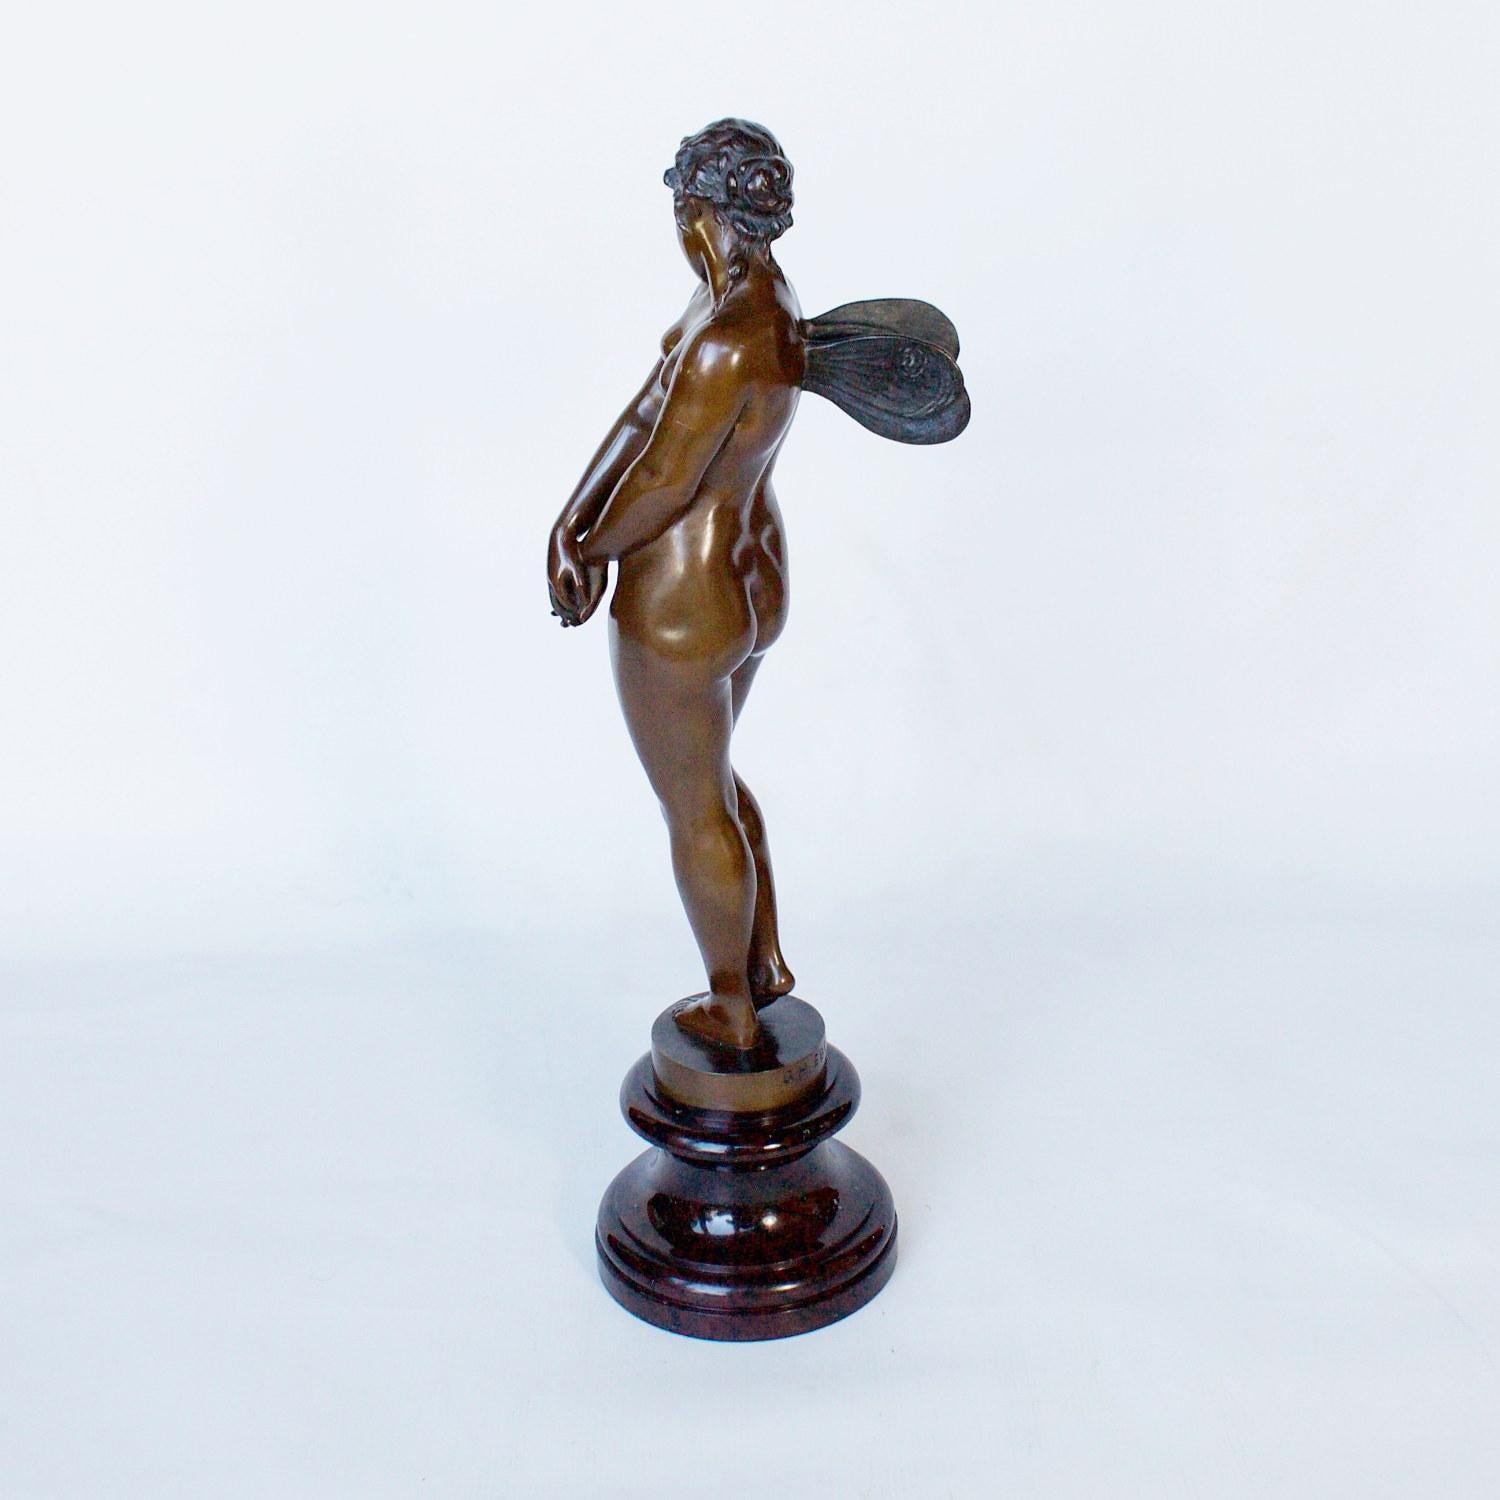 Art Nouveau Patinated Bronze Figure of a Winged Nymph by Gustav Heinrich Eberlein circa 1900